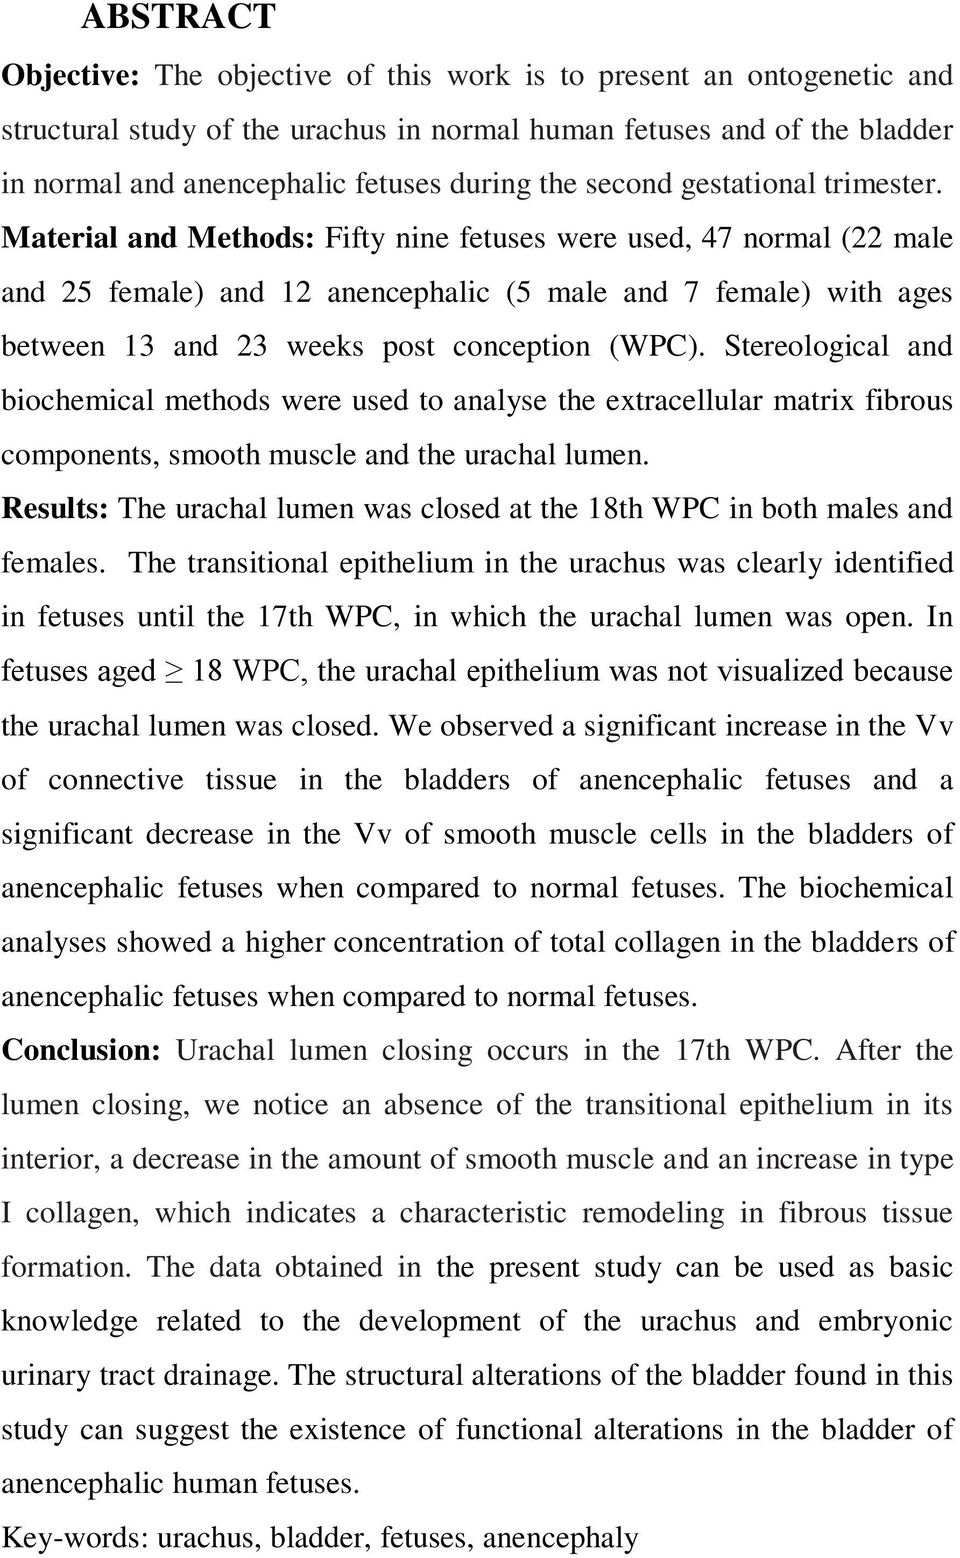 Material and Methods: Fifty nine fetuses were used, 47 normal (22 male and 25 female) and 12 anencephalic (5 male and 7 female) with ages between 13 and 23 weeks post conception (WPC).